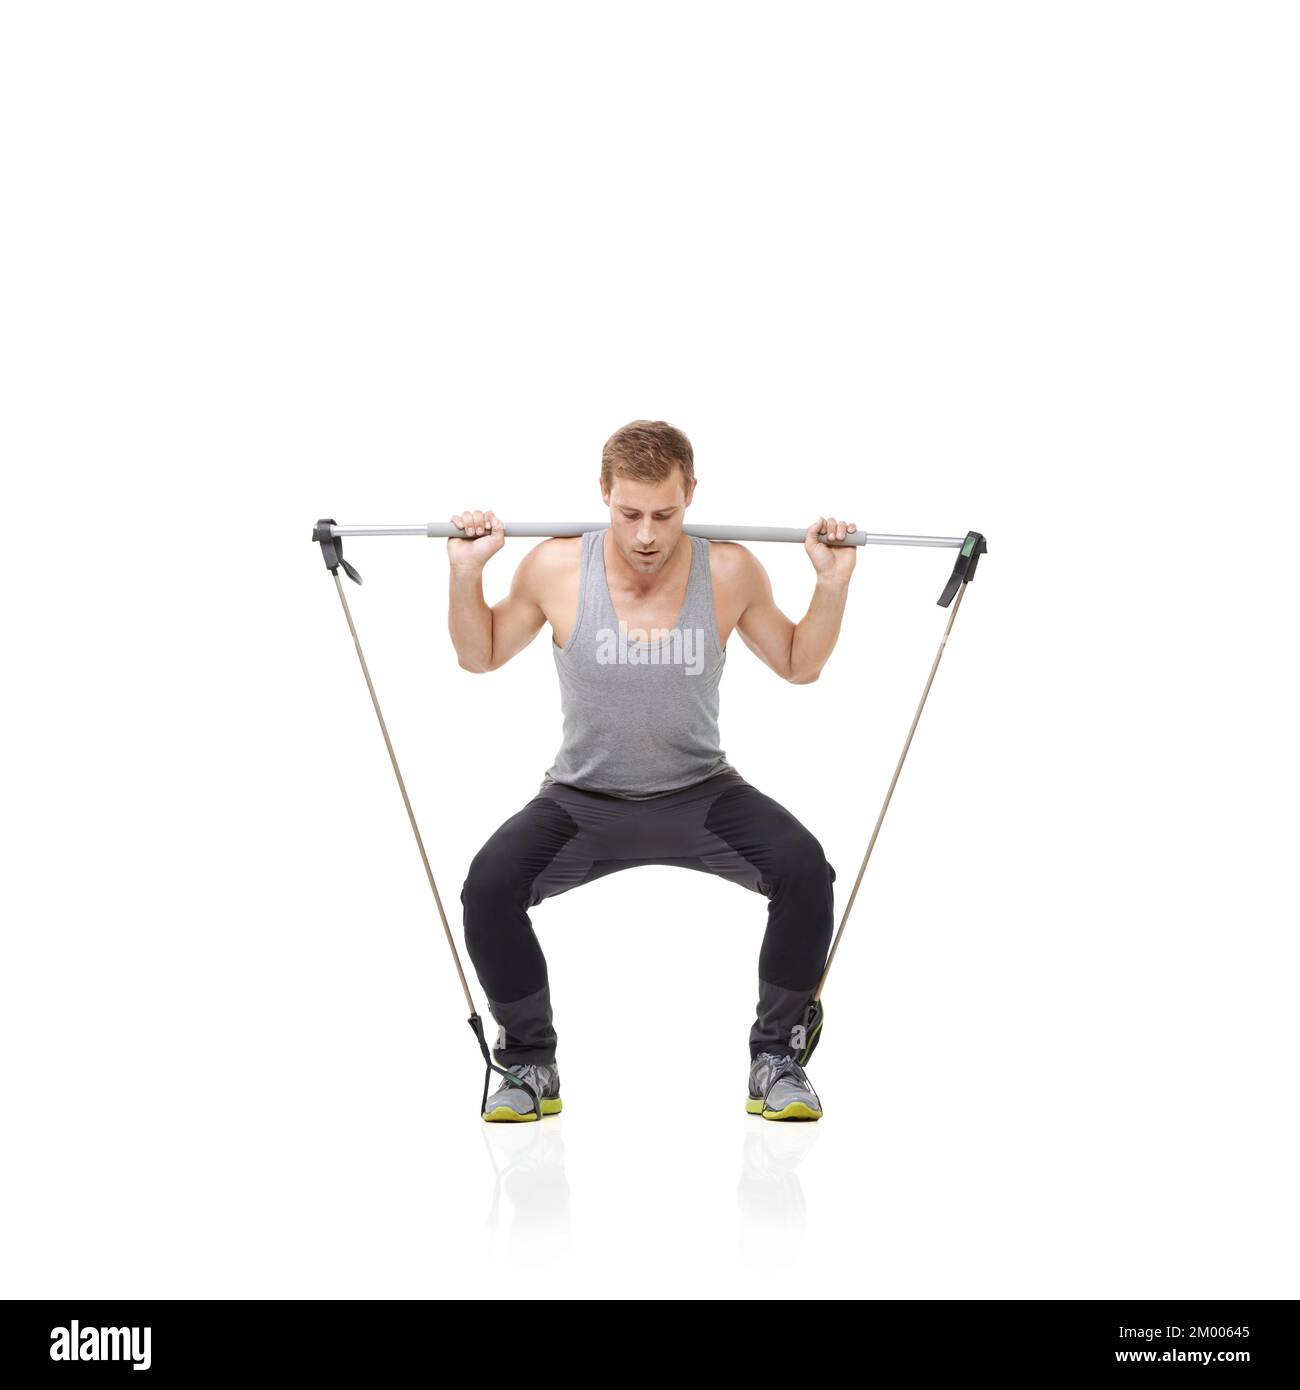 Working hard for the body he desires. A young man working his upper body with a resistance band. Stock Photo